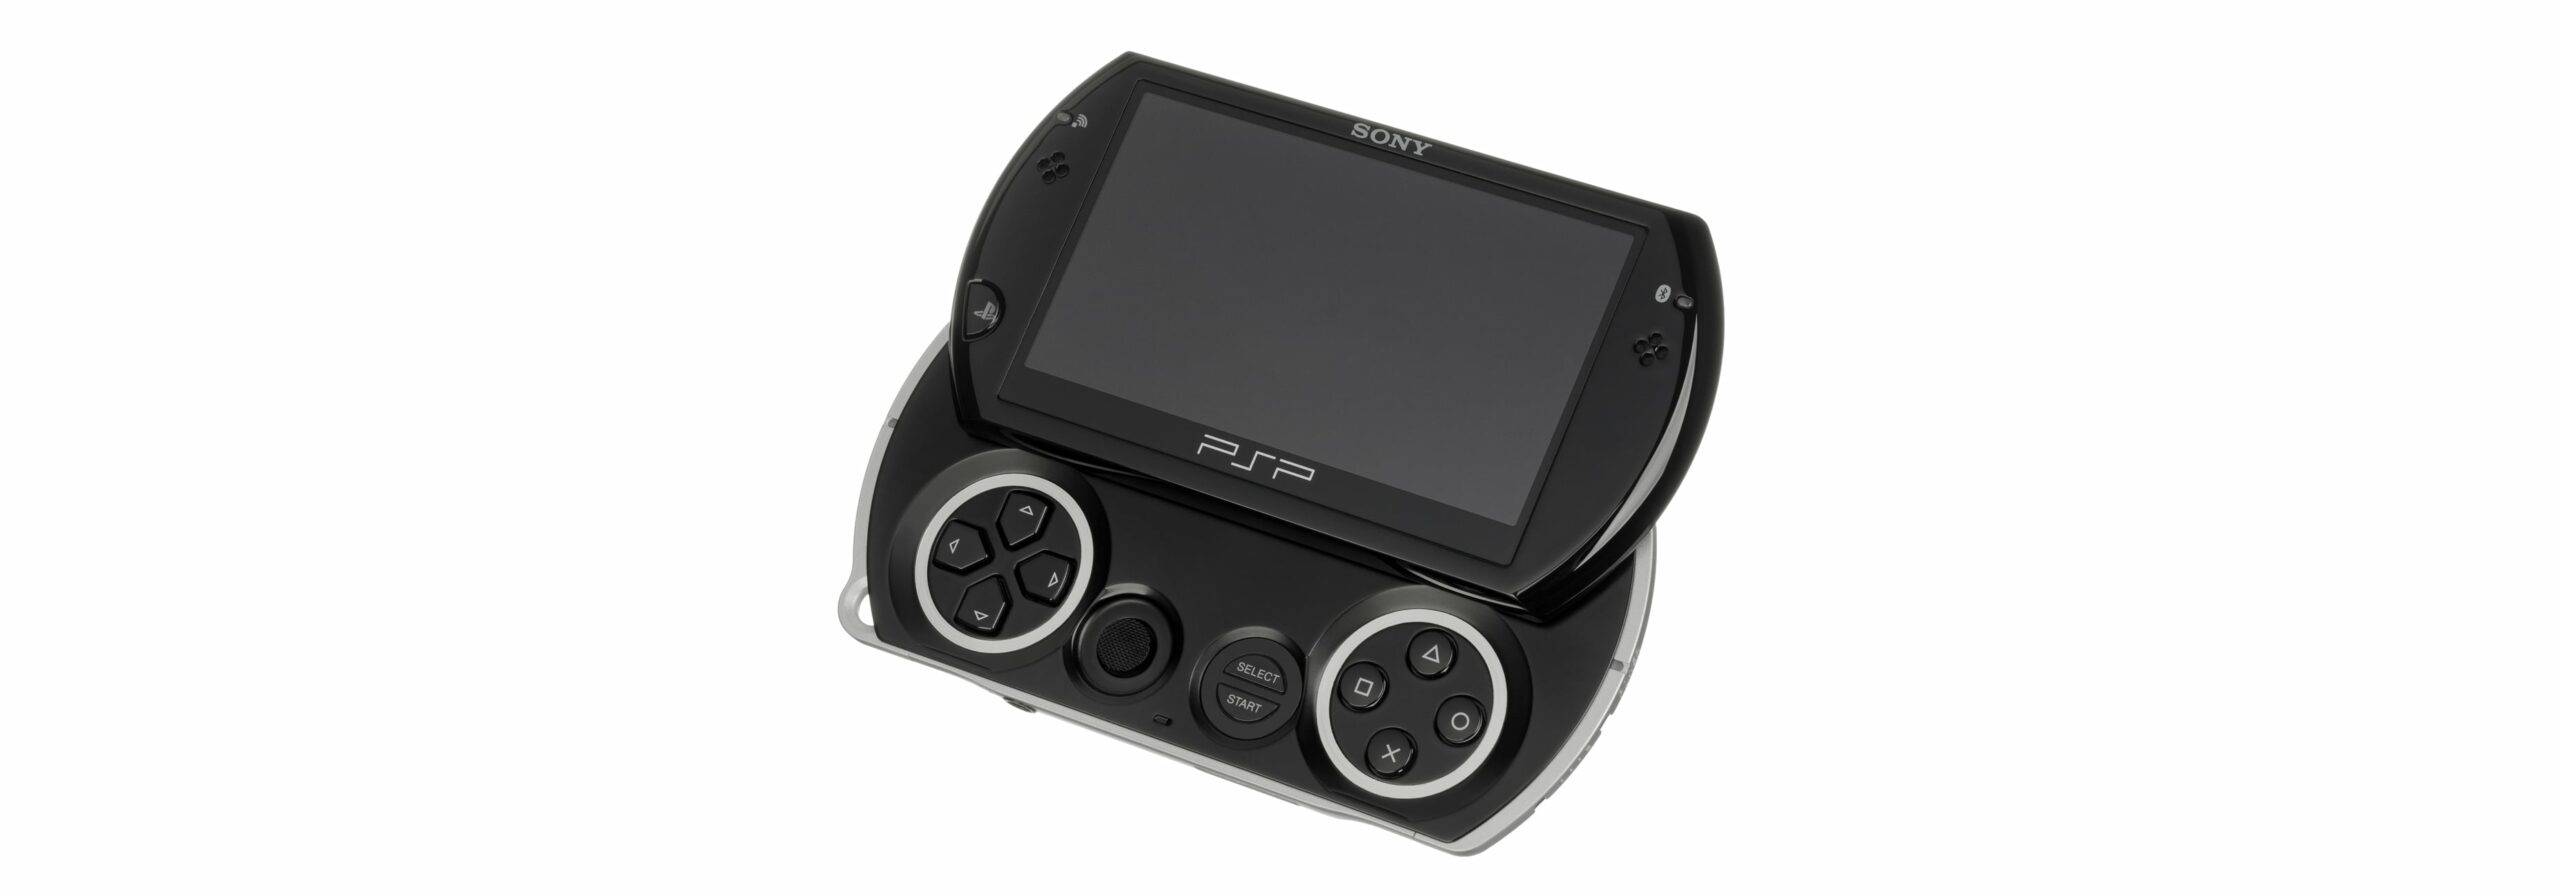 PlayStation's PSP Go gaming device